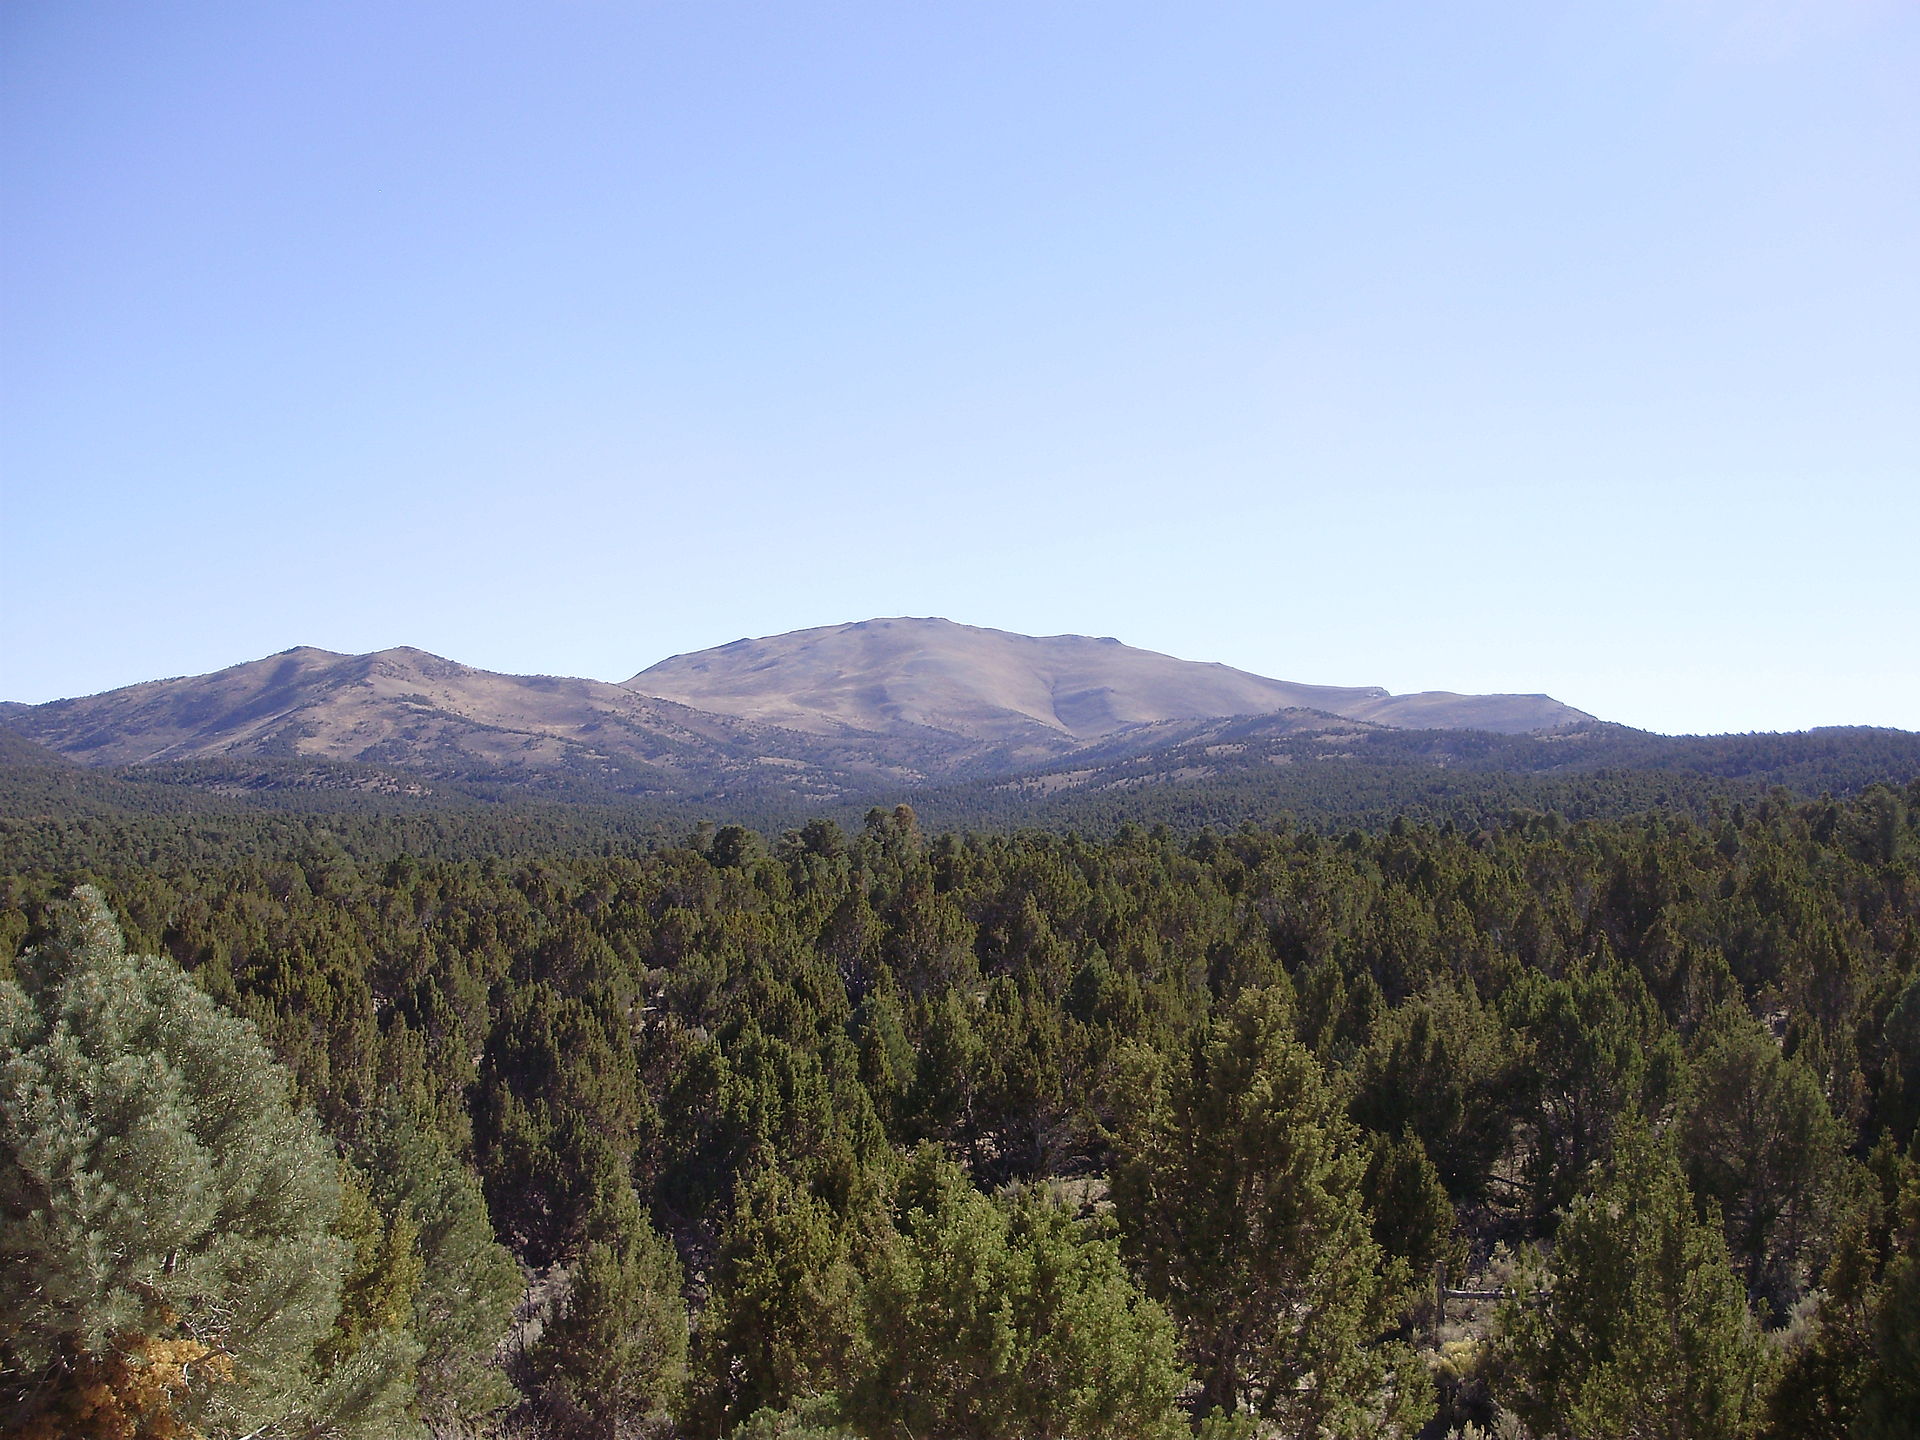 View south towards Big Bald Mountain from White Pine County Route 6 ascending Overland Pass from the east